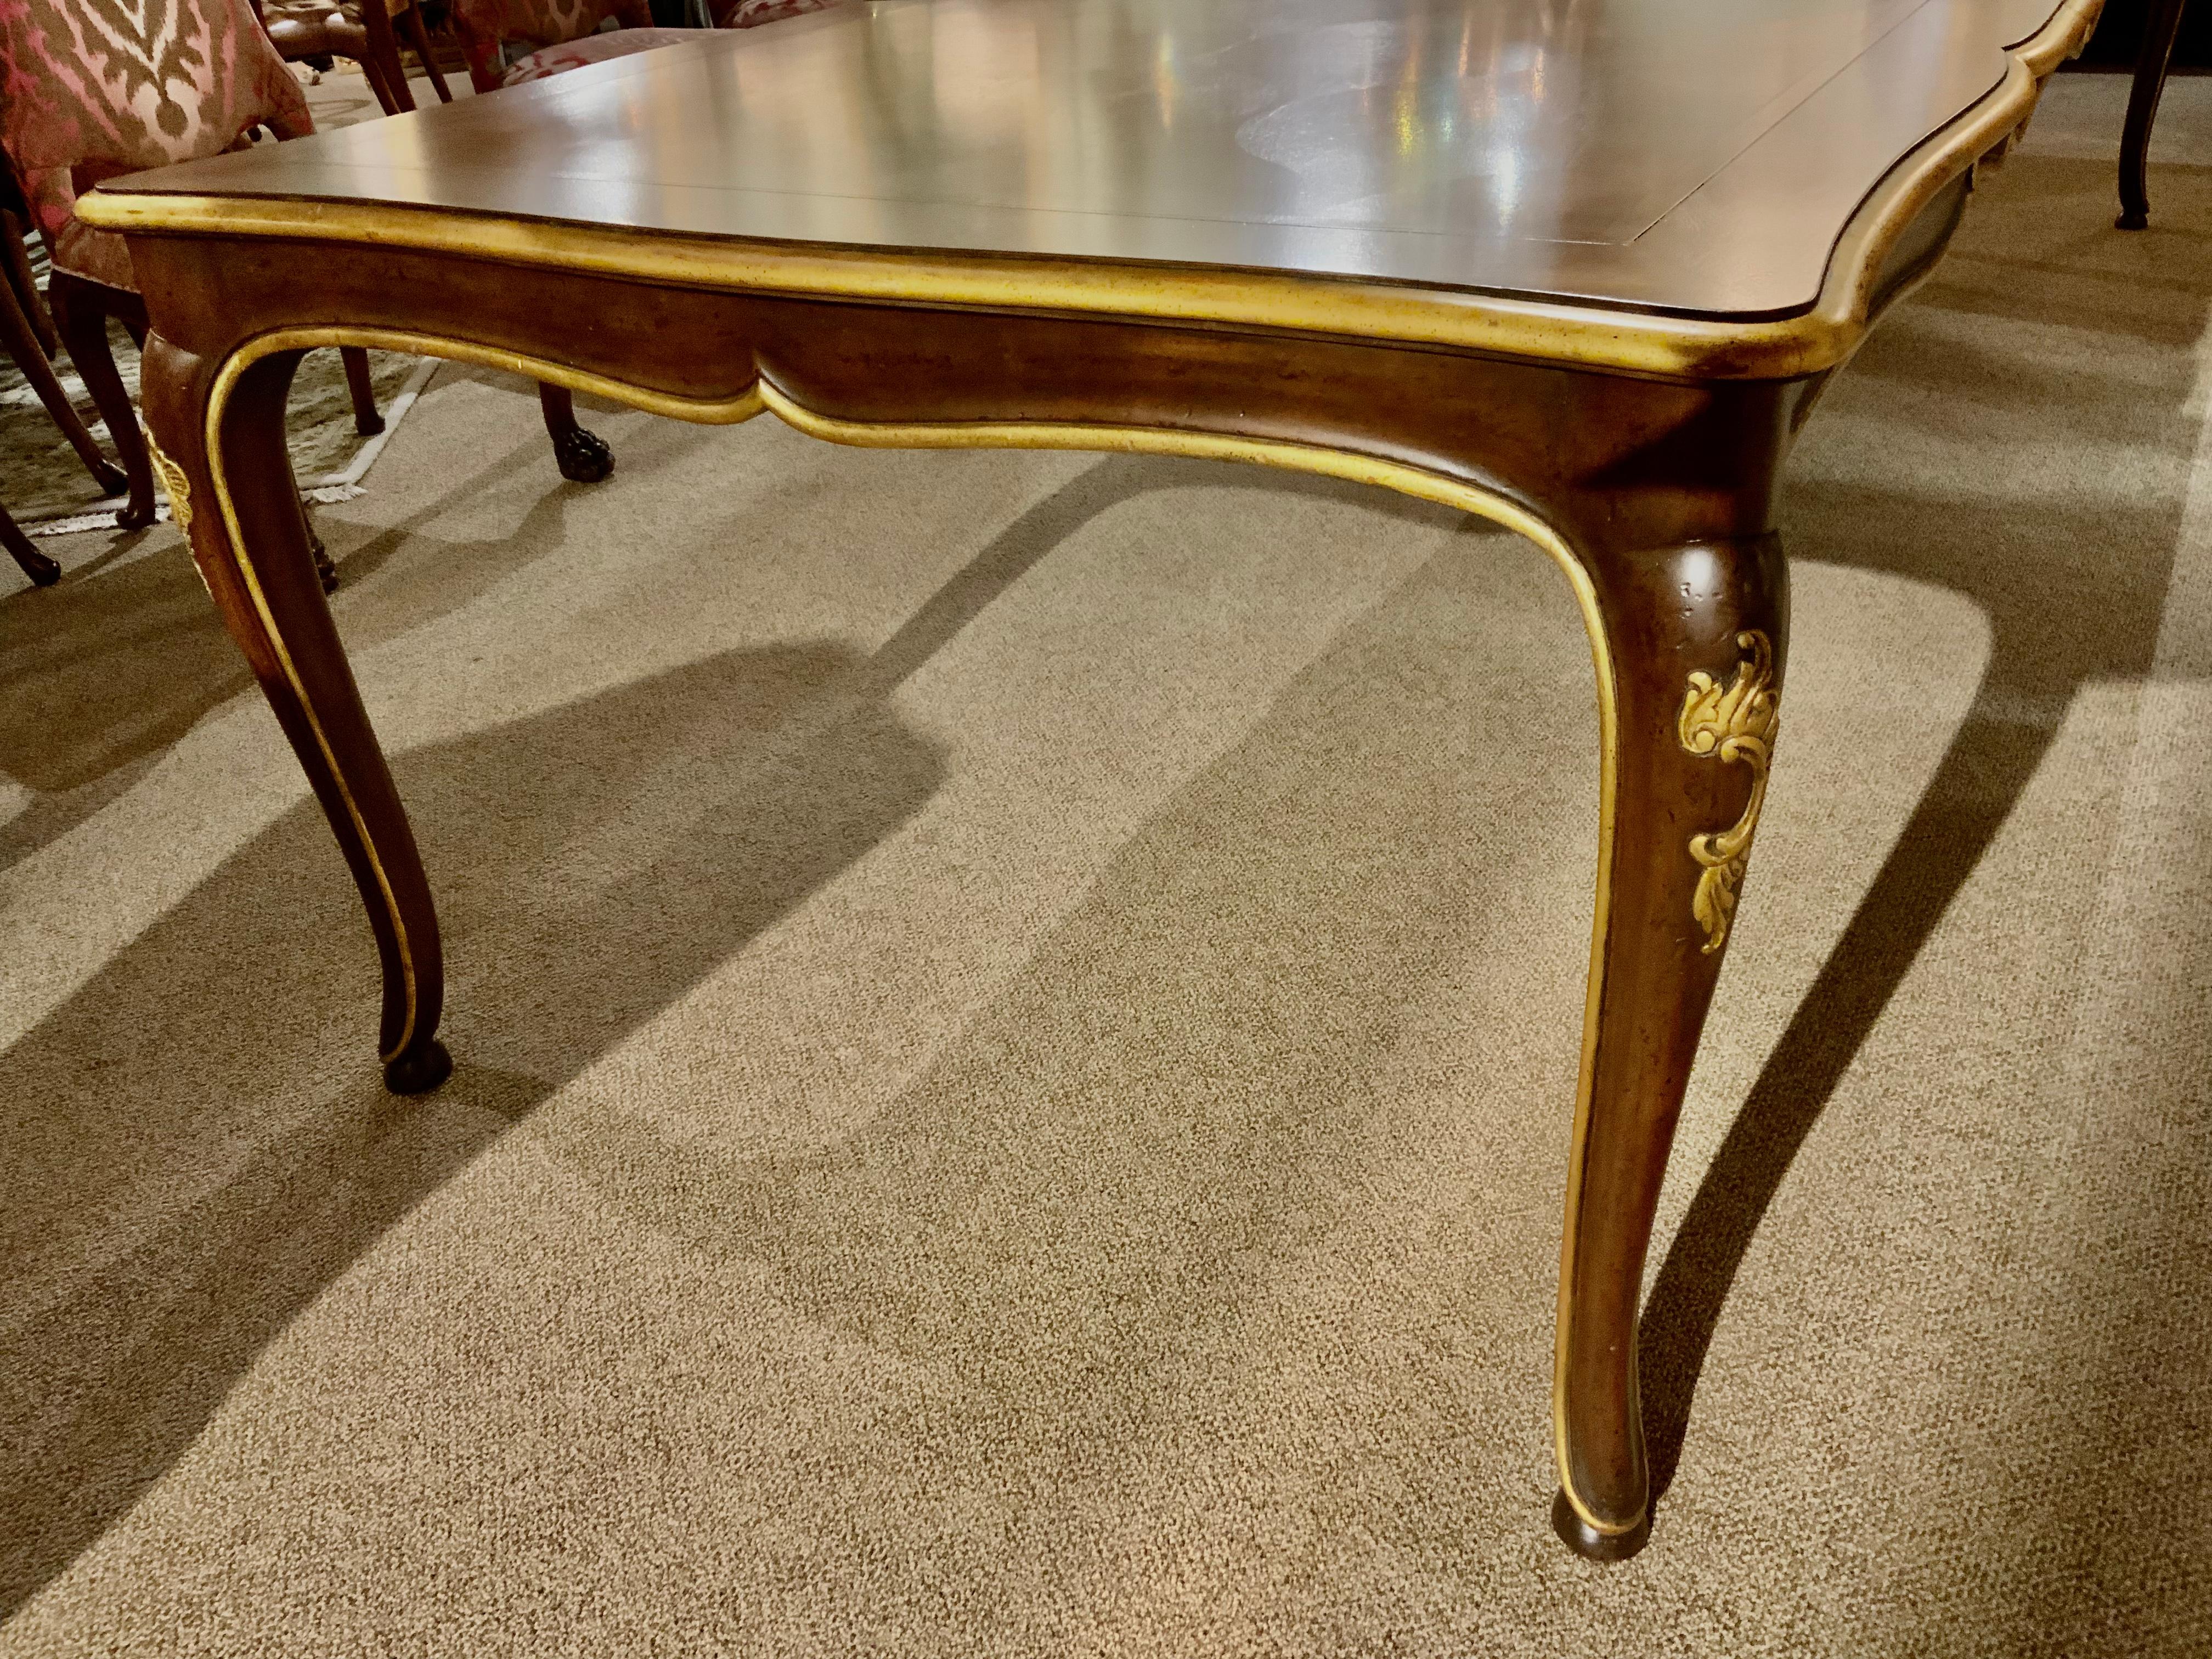 Dining table in the Louis XV-Style with gently curved legs and a curve
To the top of the table. A marquetry design in a lantern shape embellishes
The top surface. A gilt finish in a warm gold surrounds the top edge of
This table and the apron and